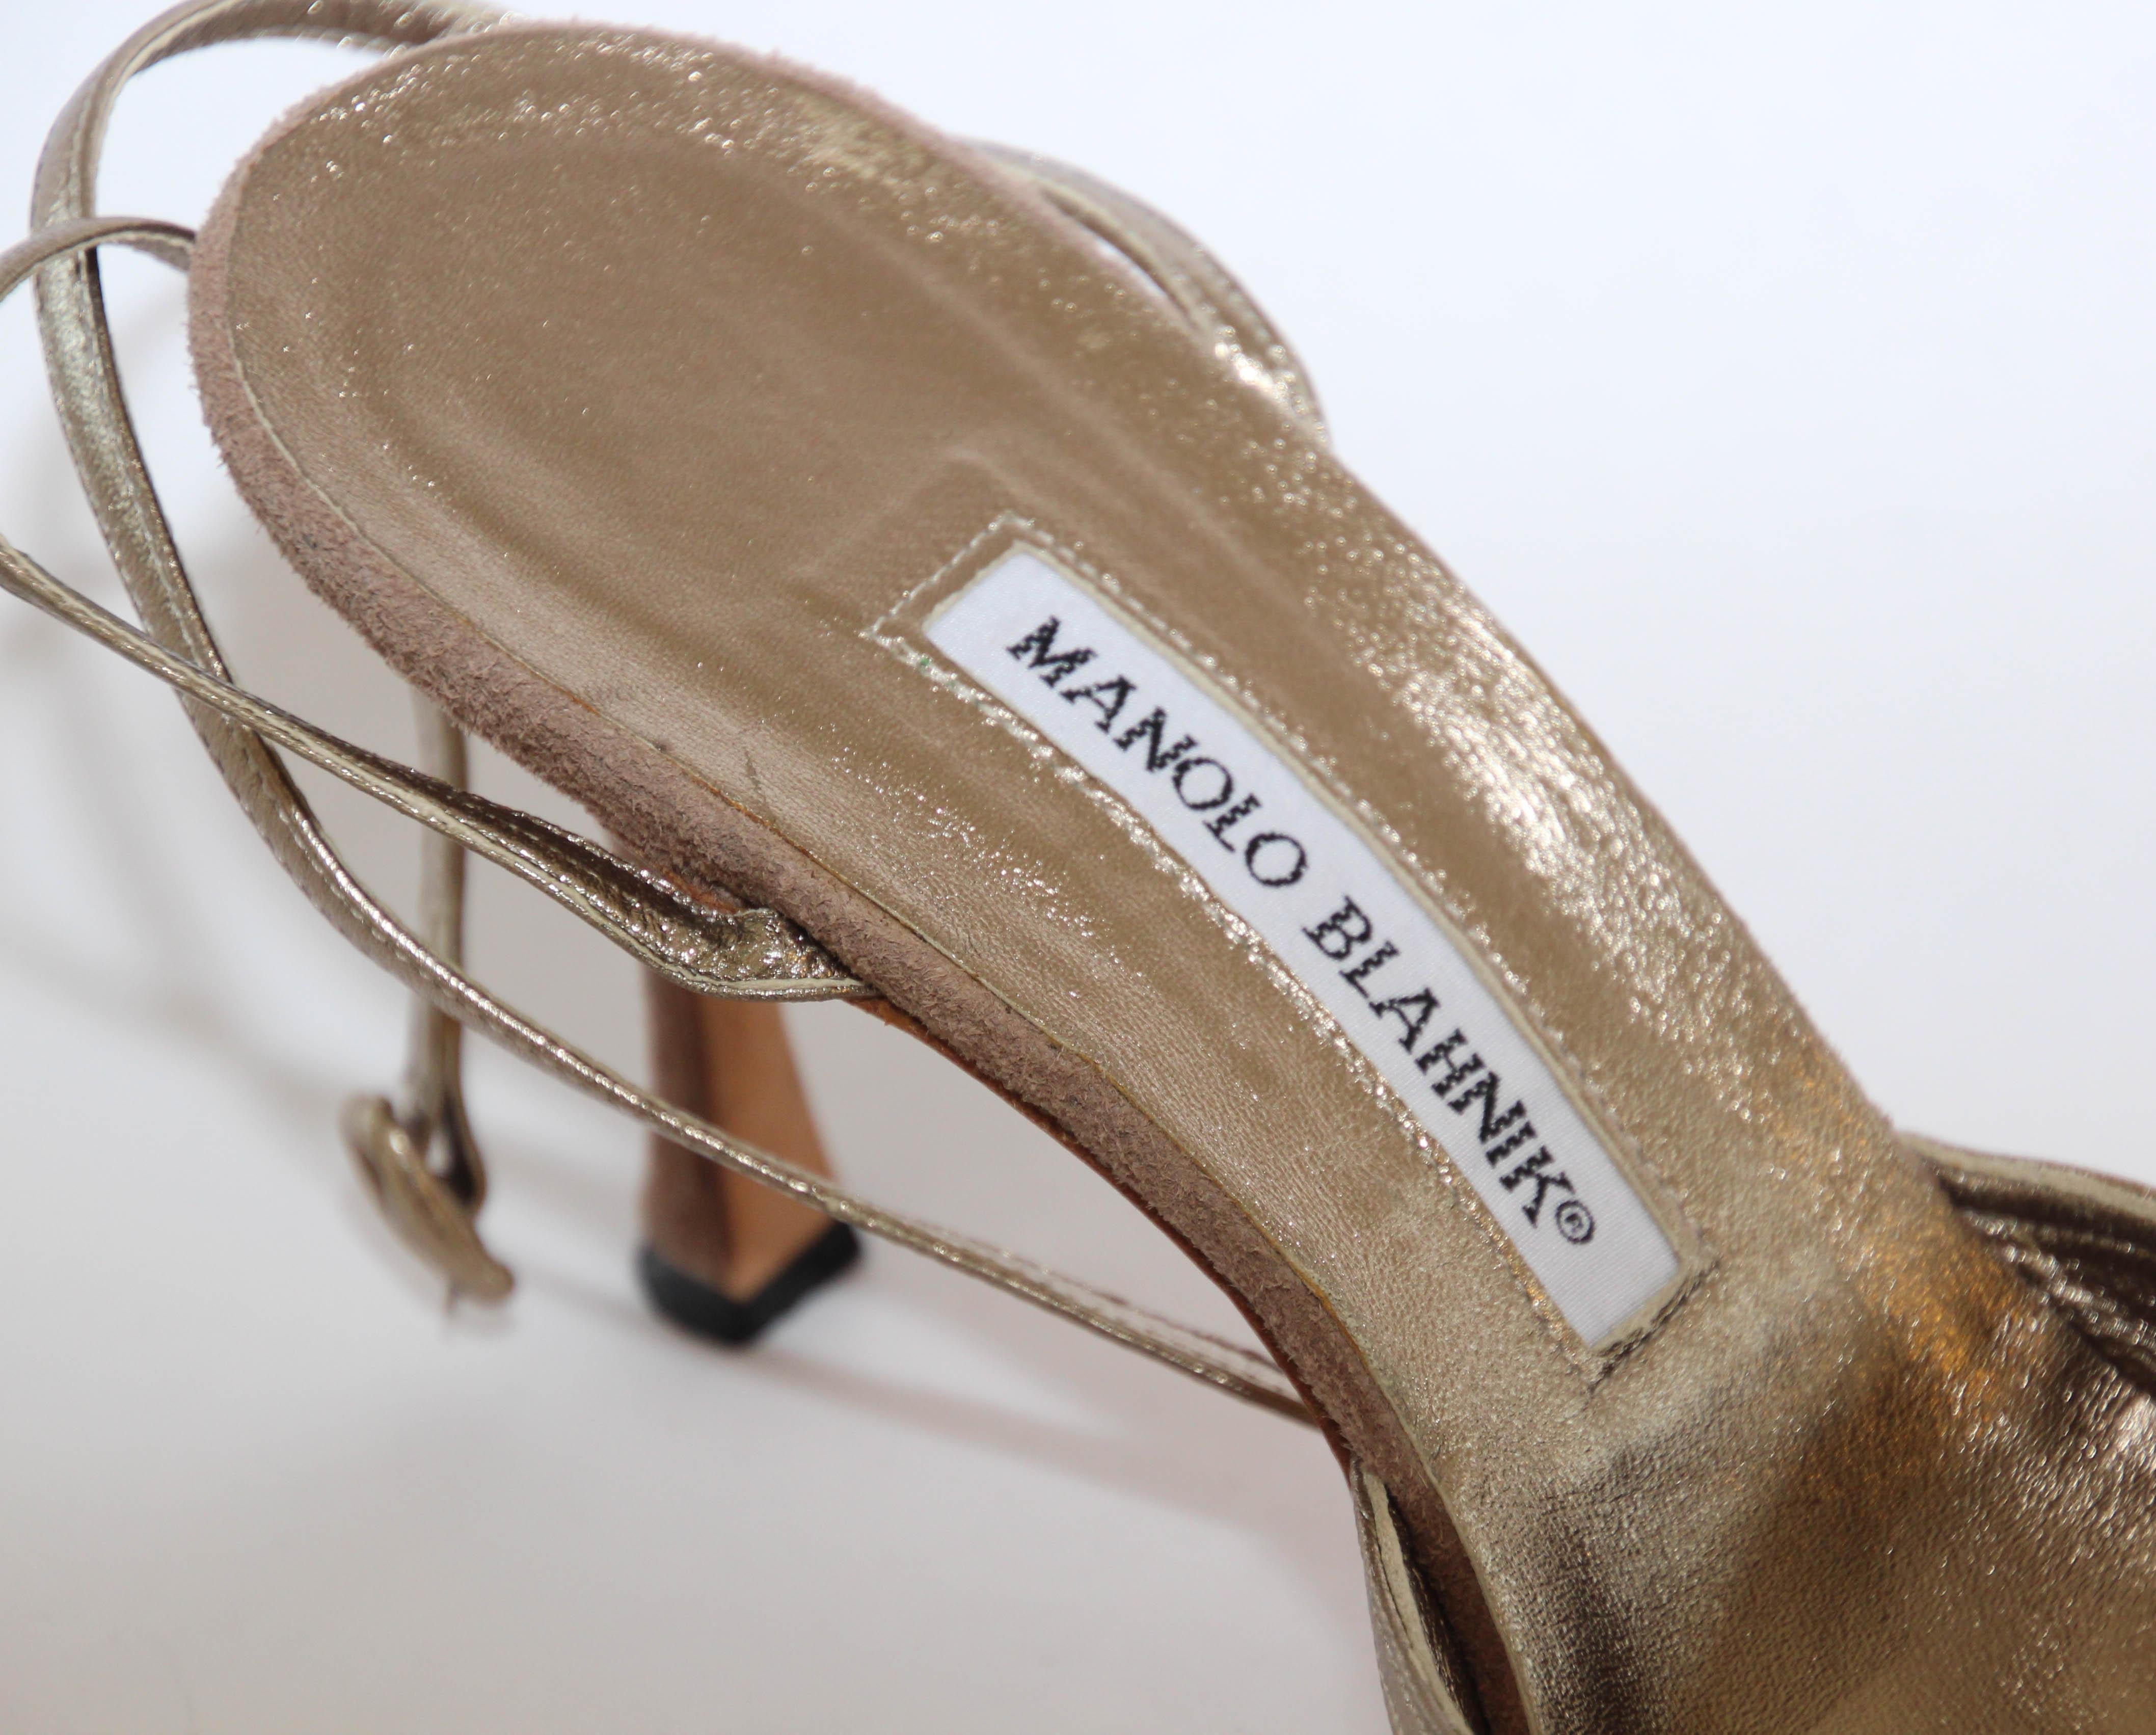 Manolo Blahnik Vintage Suede Shoes With Leather Ankle Straps Size 40 In Good Condition For Sale In North Hollywood, CA